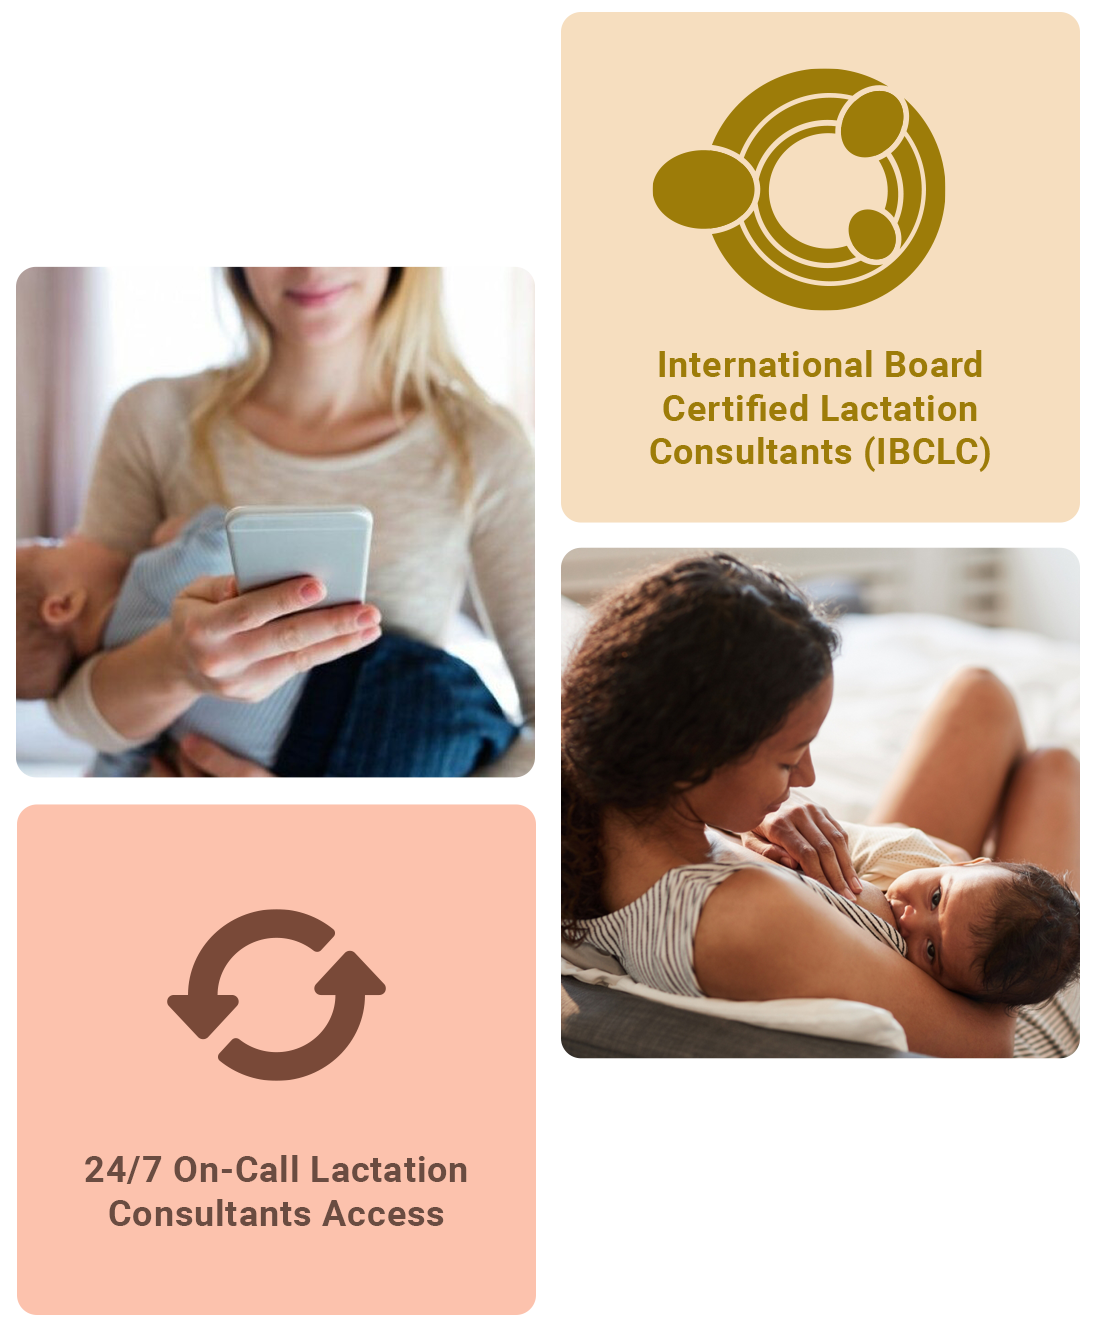 Lactation Consulting Benefits